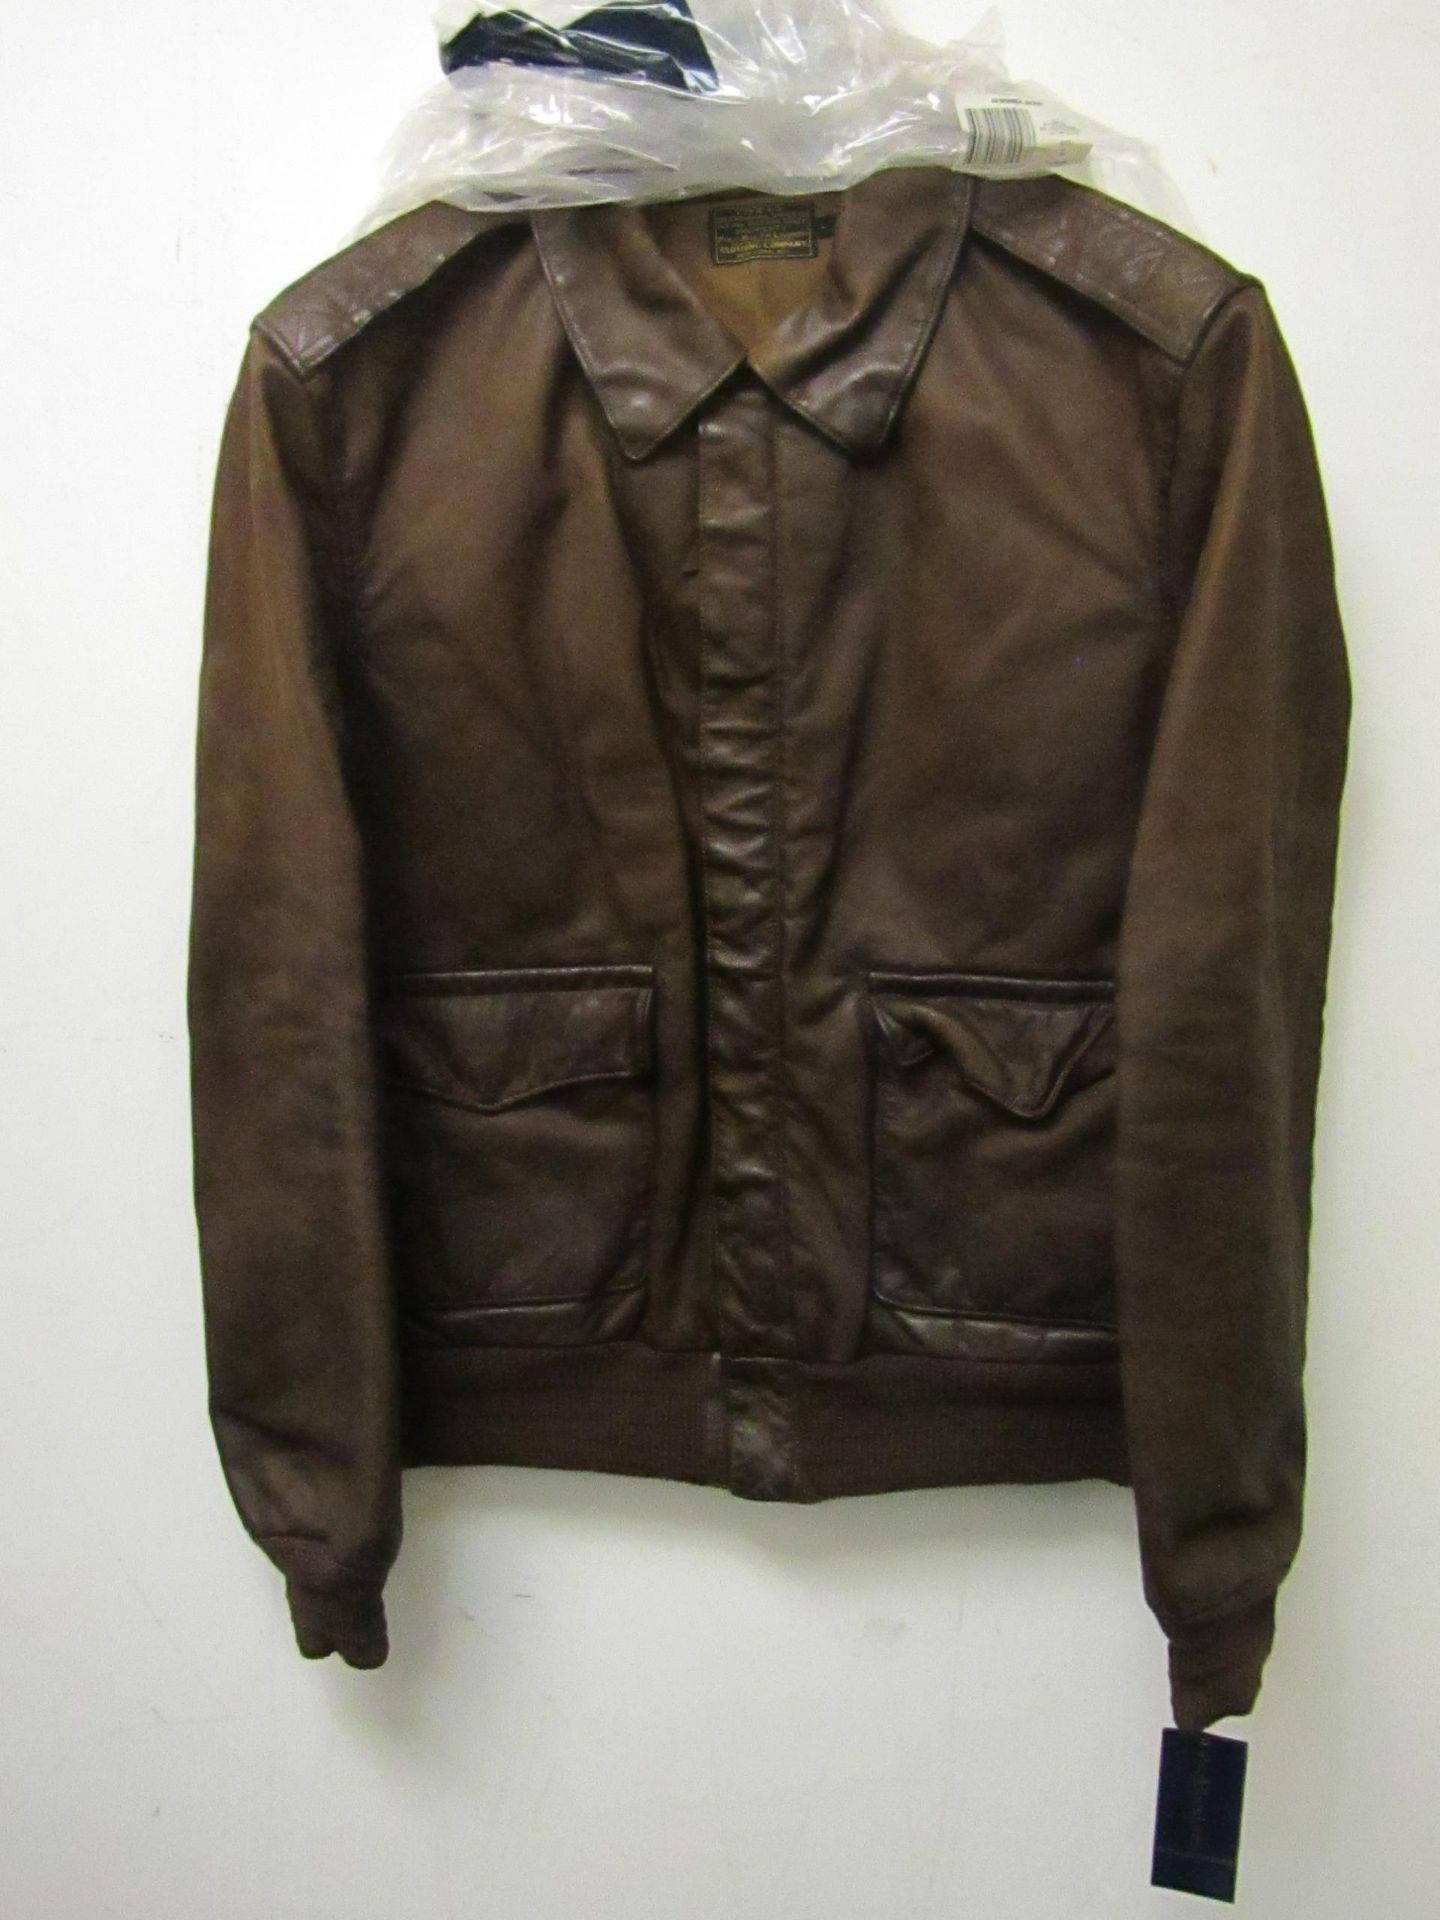 Polo Ralph Lauren A2 bomber jacket leather, size 40, with tags.